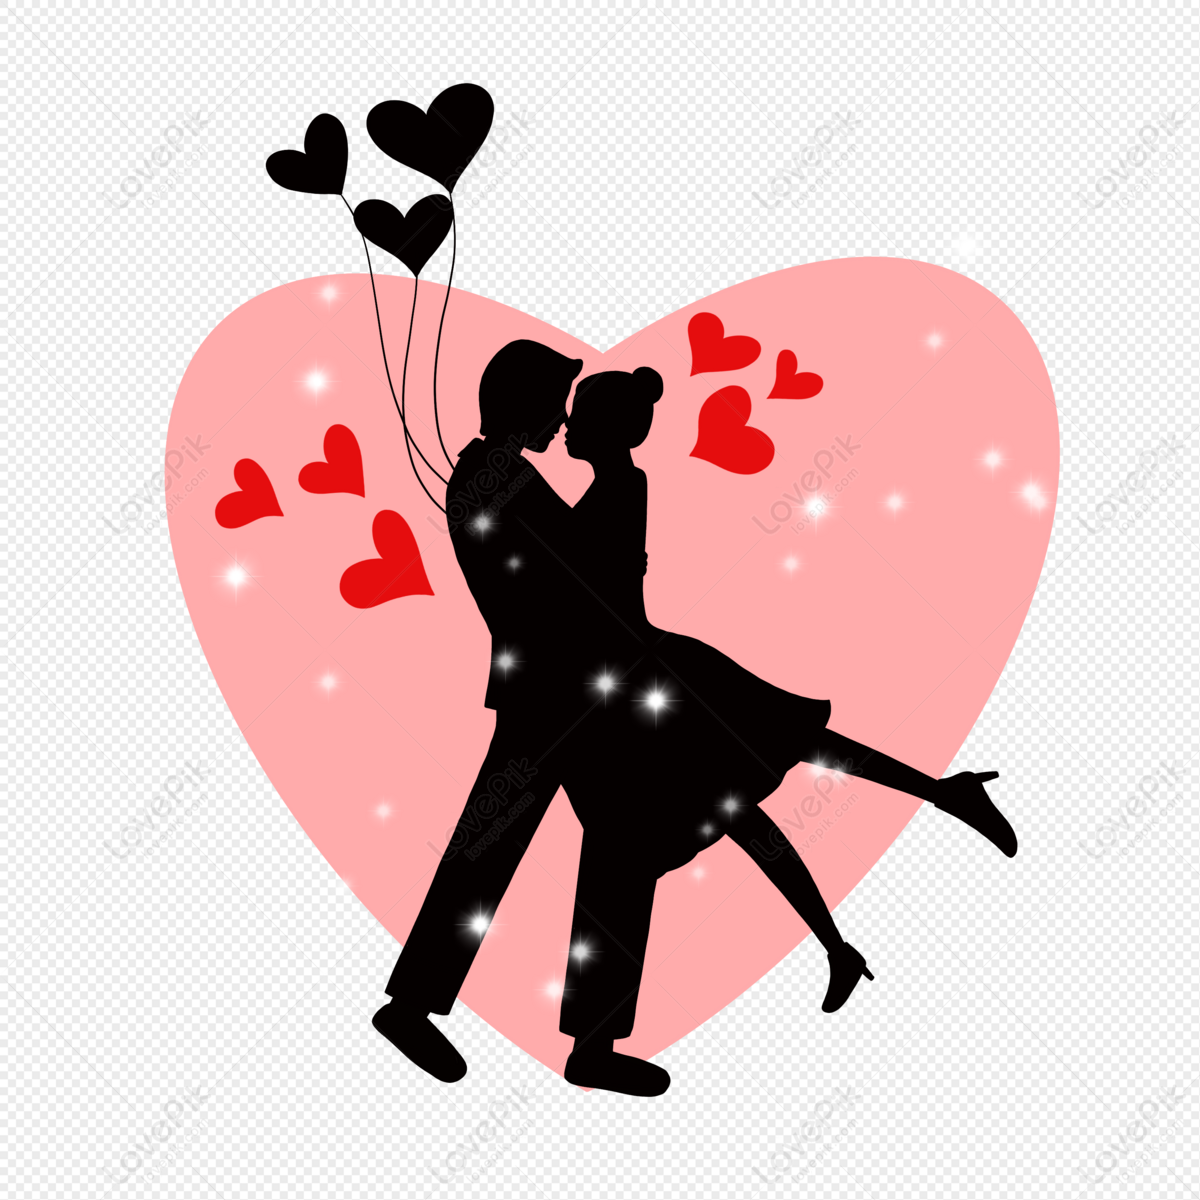 Embracing Couple Black Silhouette PNG Free Download And Clipart Image For  Free Download - Lovepik | 401724993